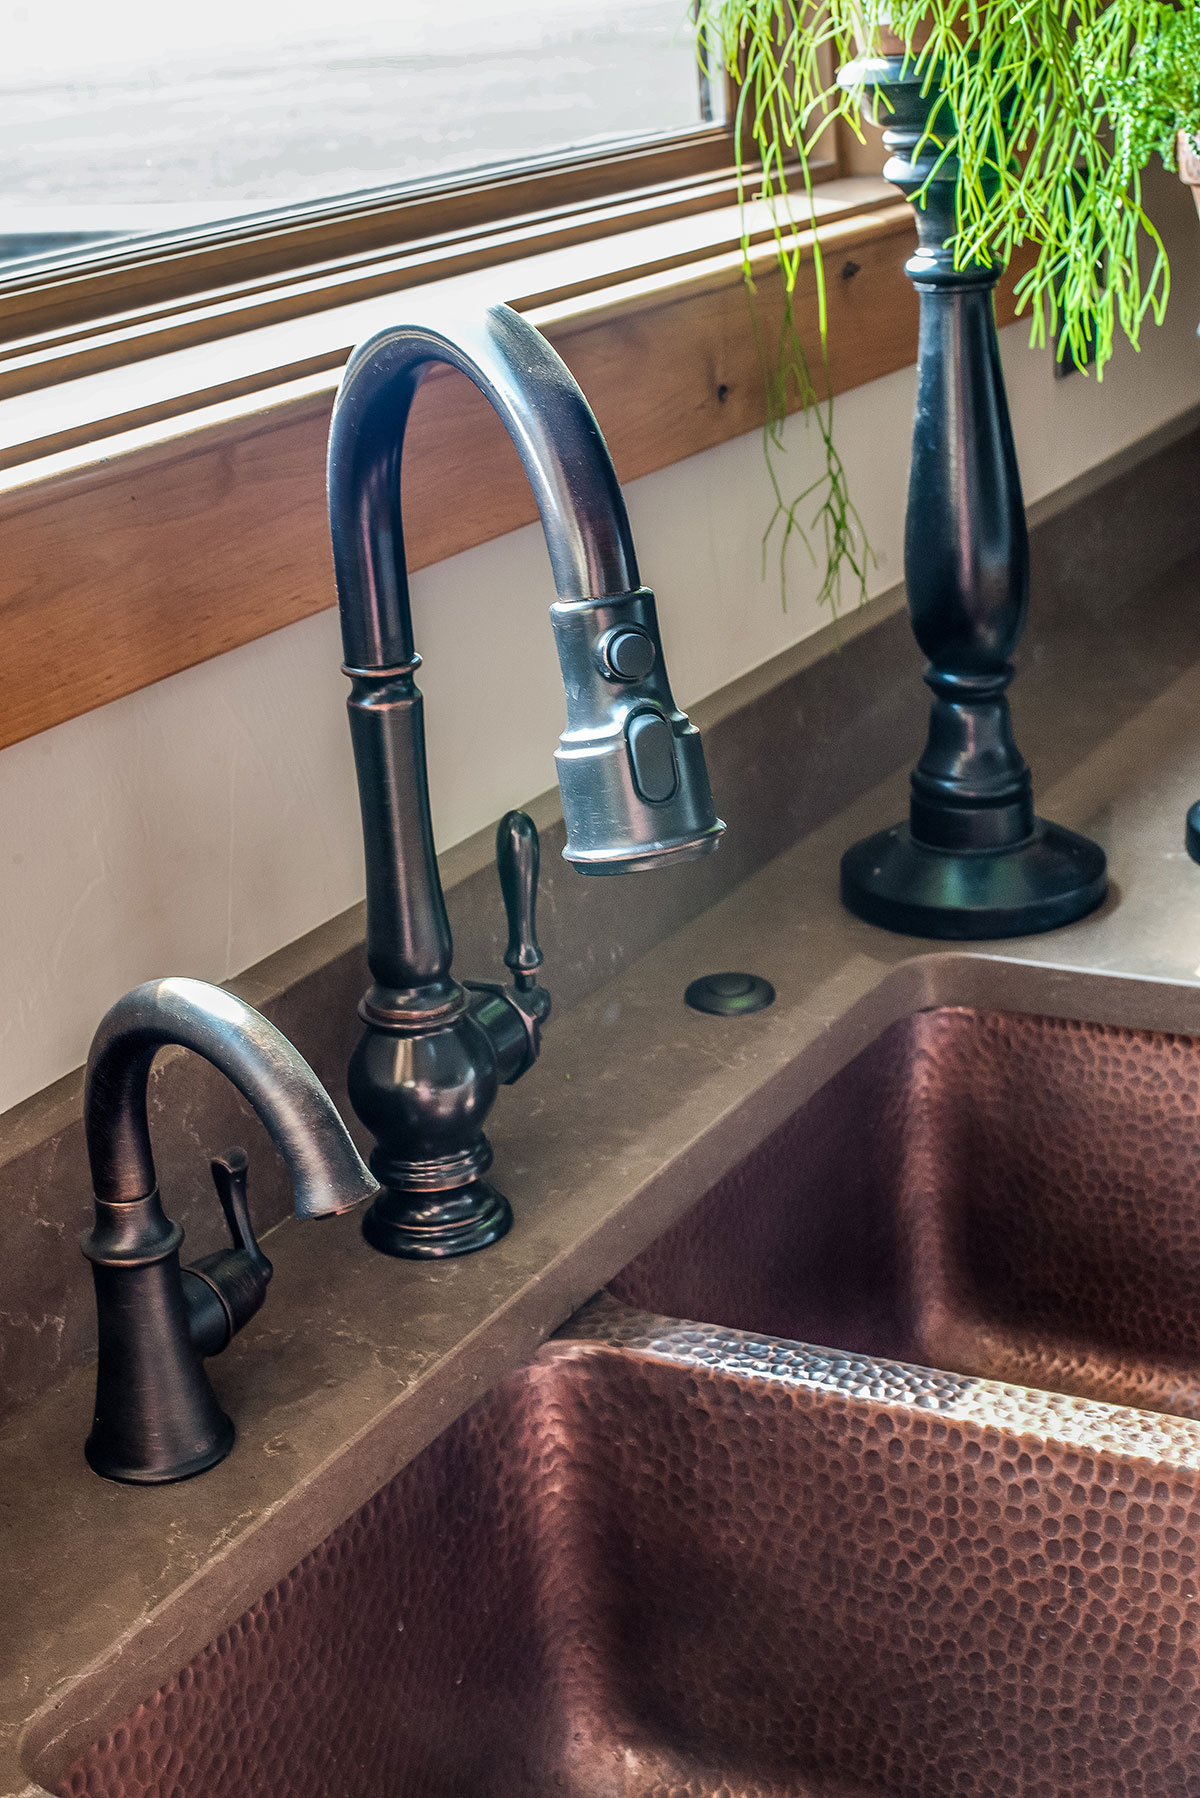 A copper double basin farmhouse sink with rubbed bronze fixtures below a window with a plant next to it